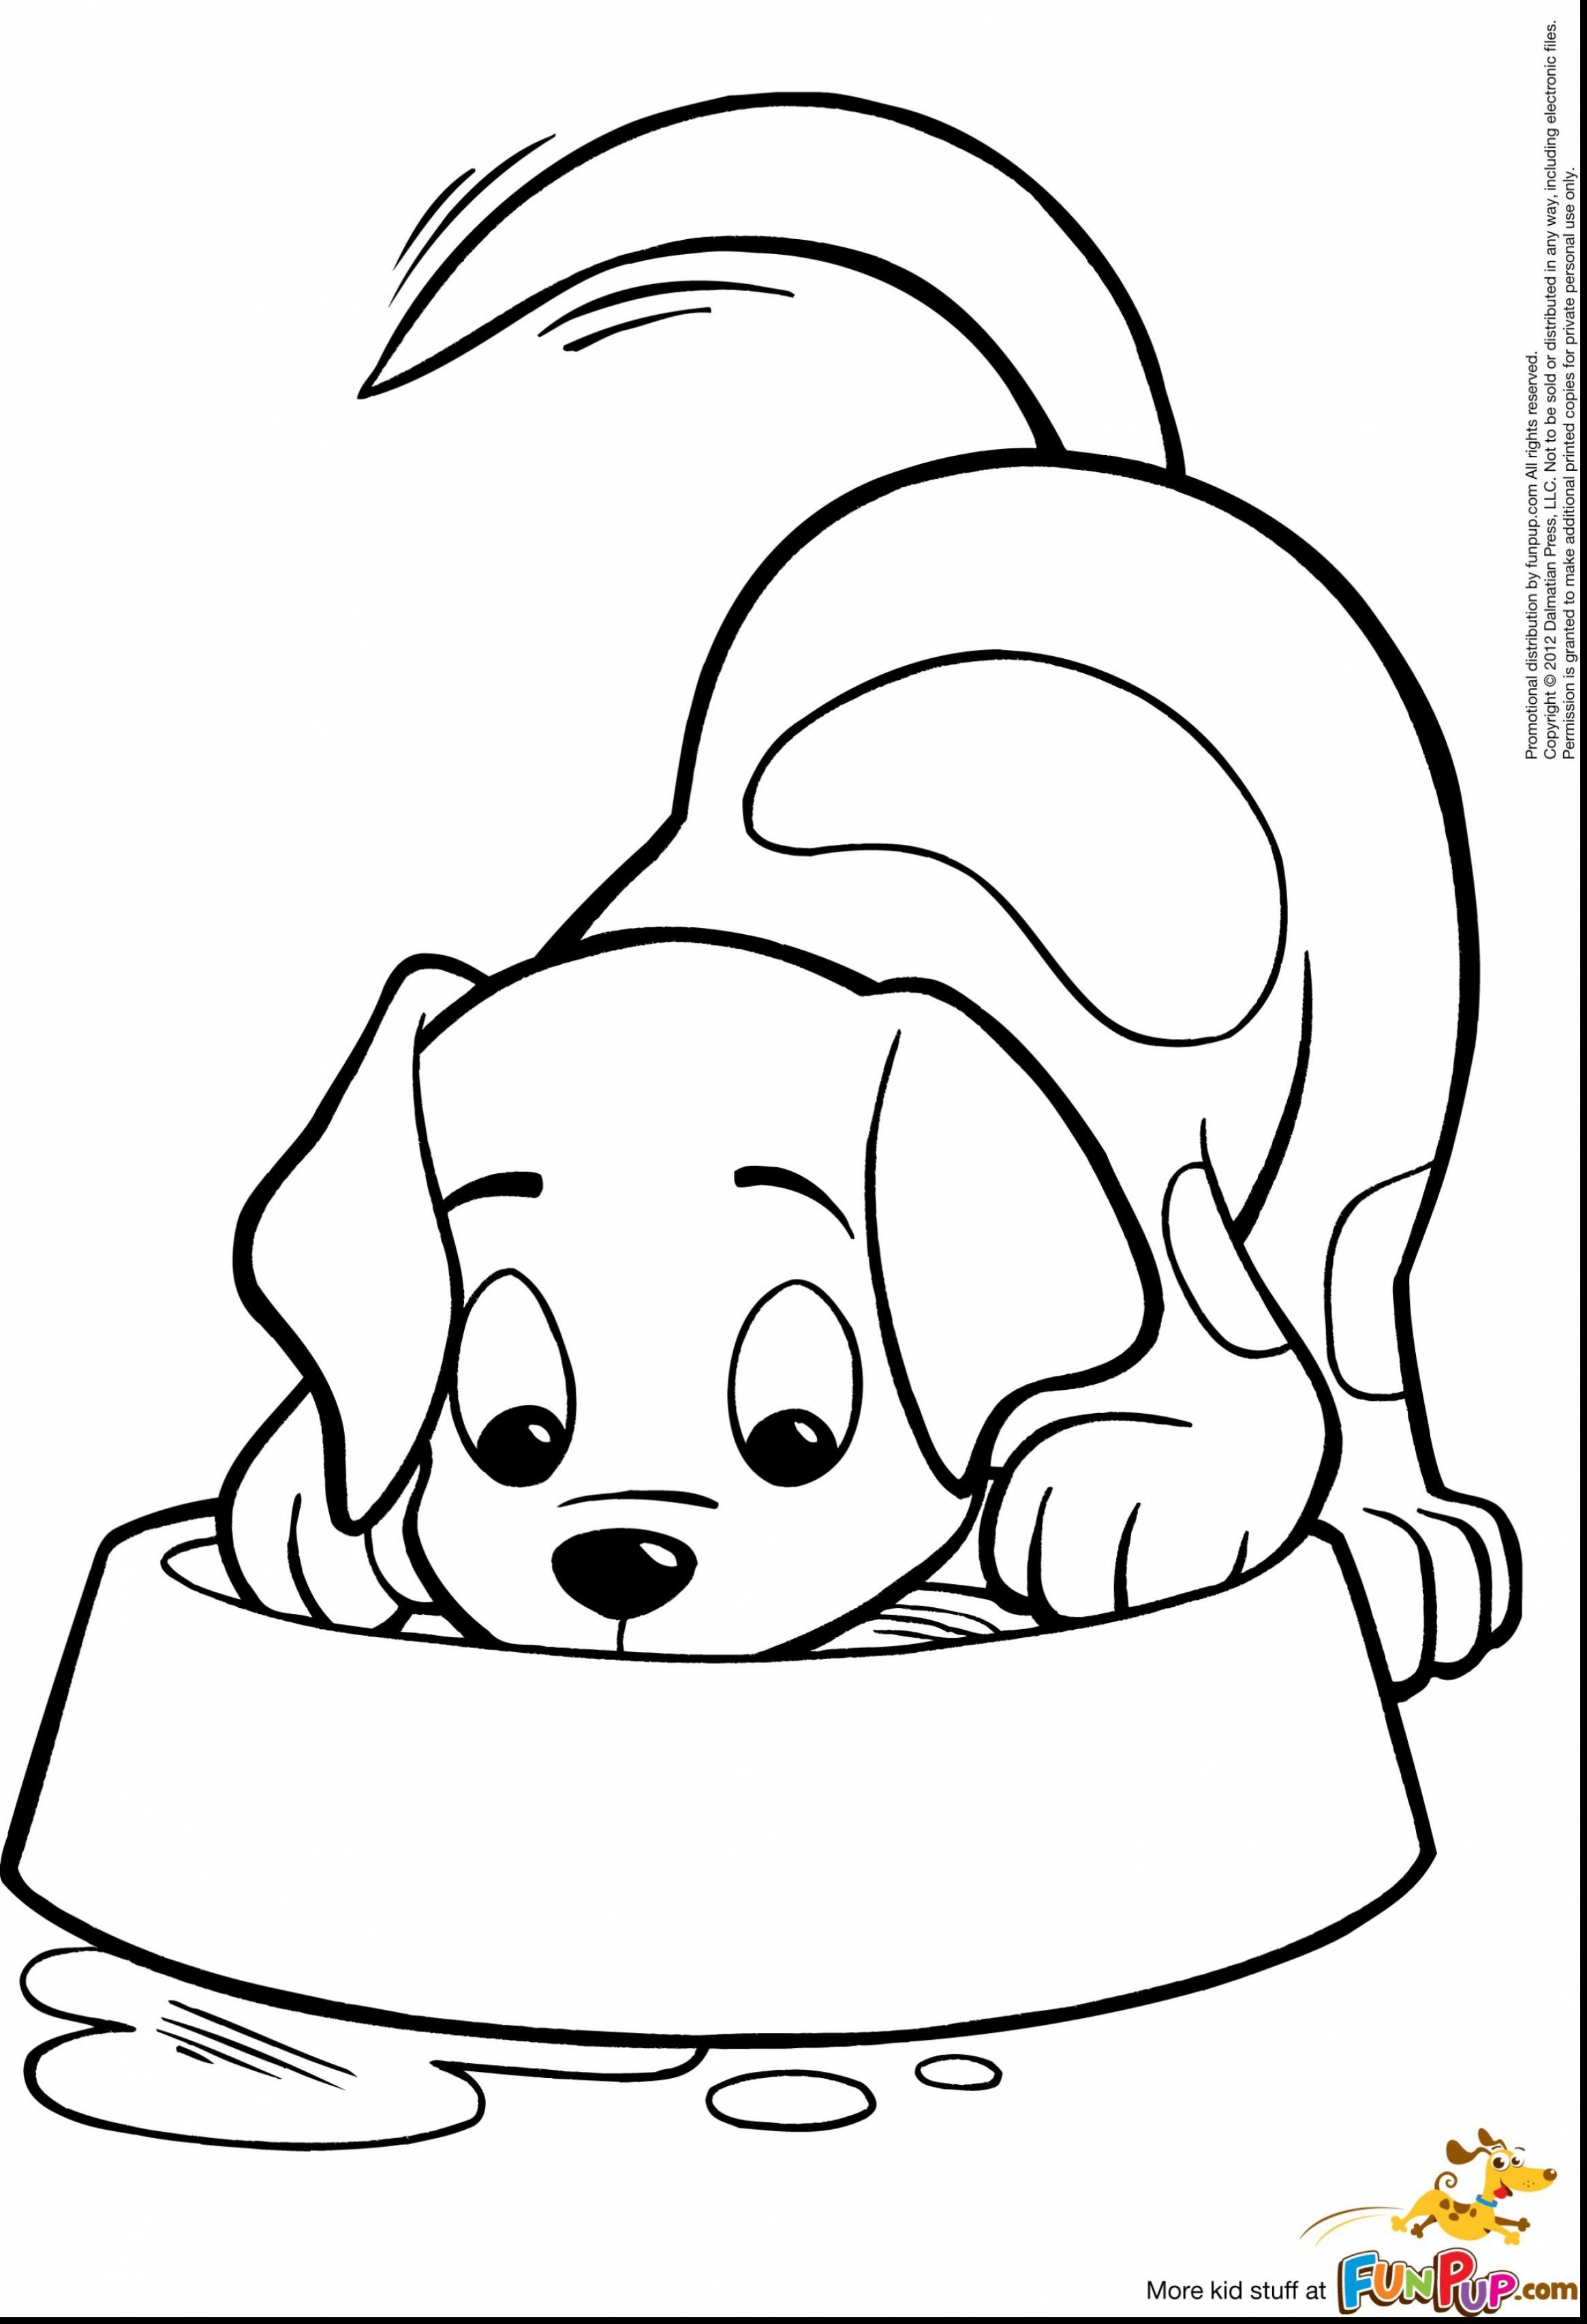 Cartoon Puppies Coloring Pages Best Coloring Sheets to Print for Free Princess Puppy Coloring Page